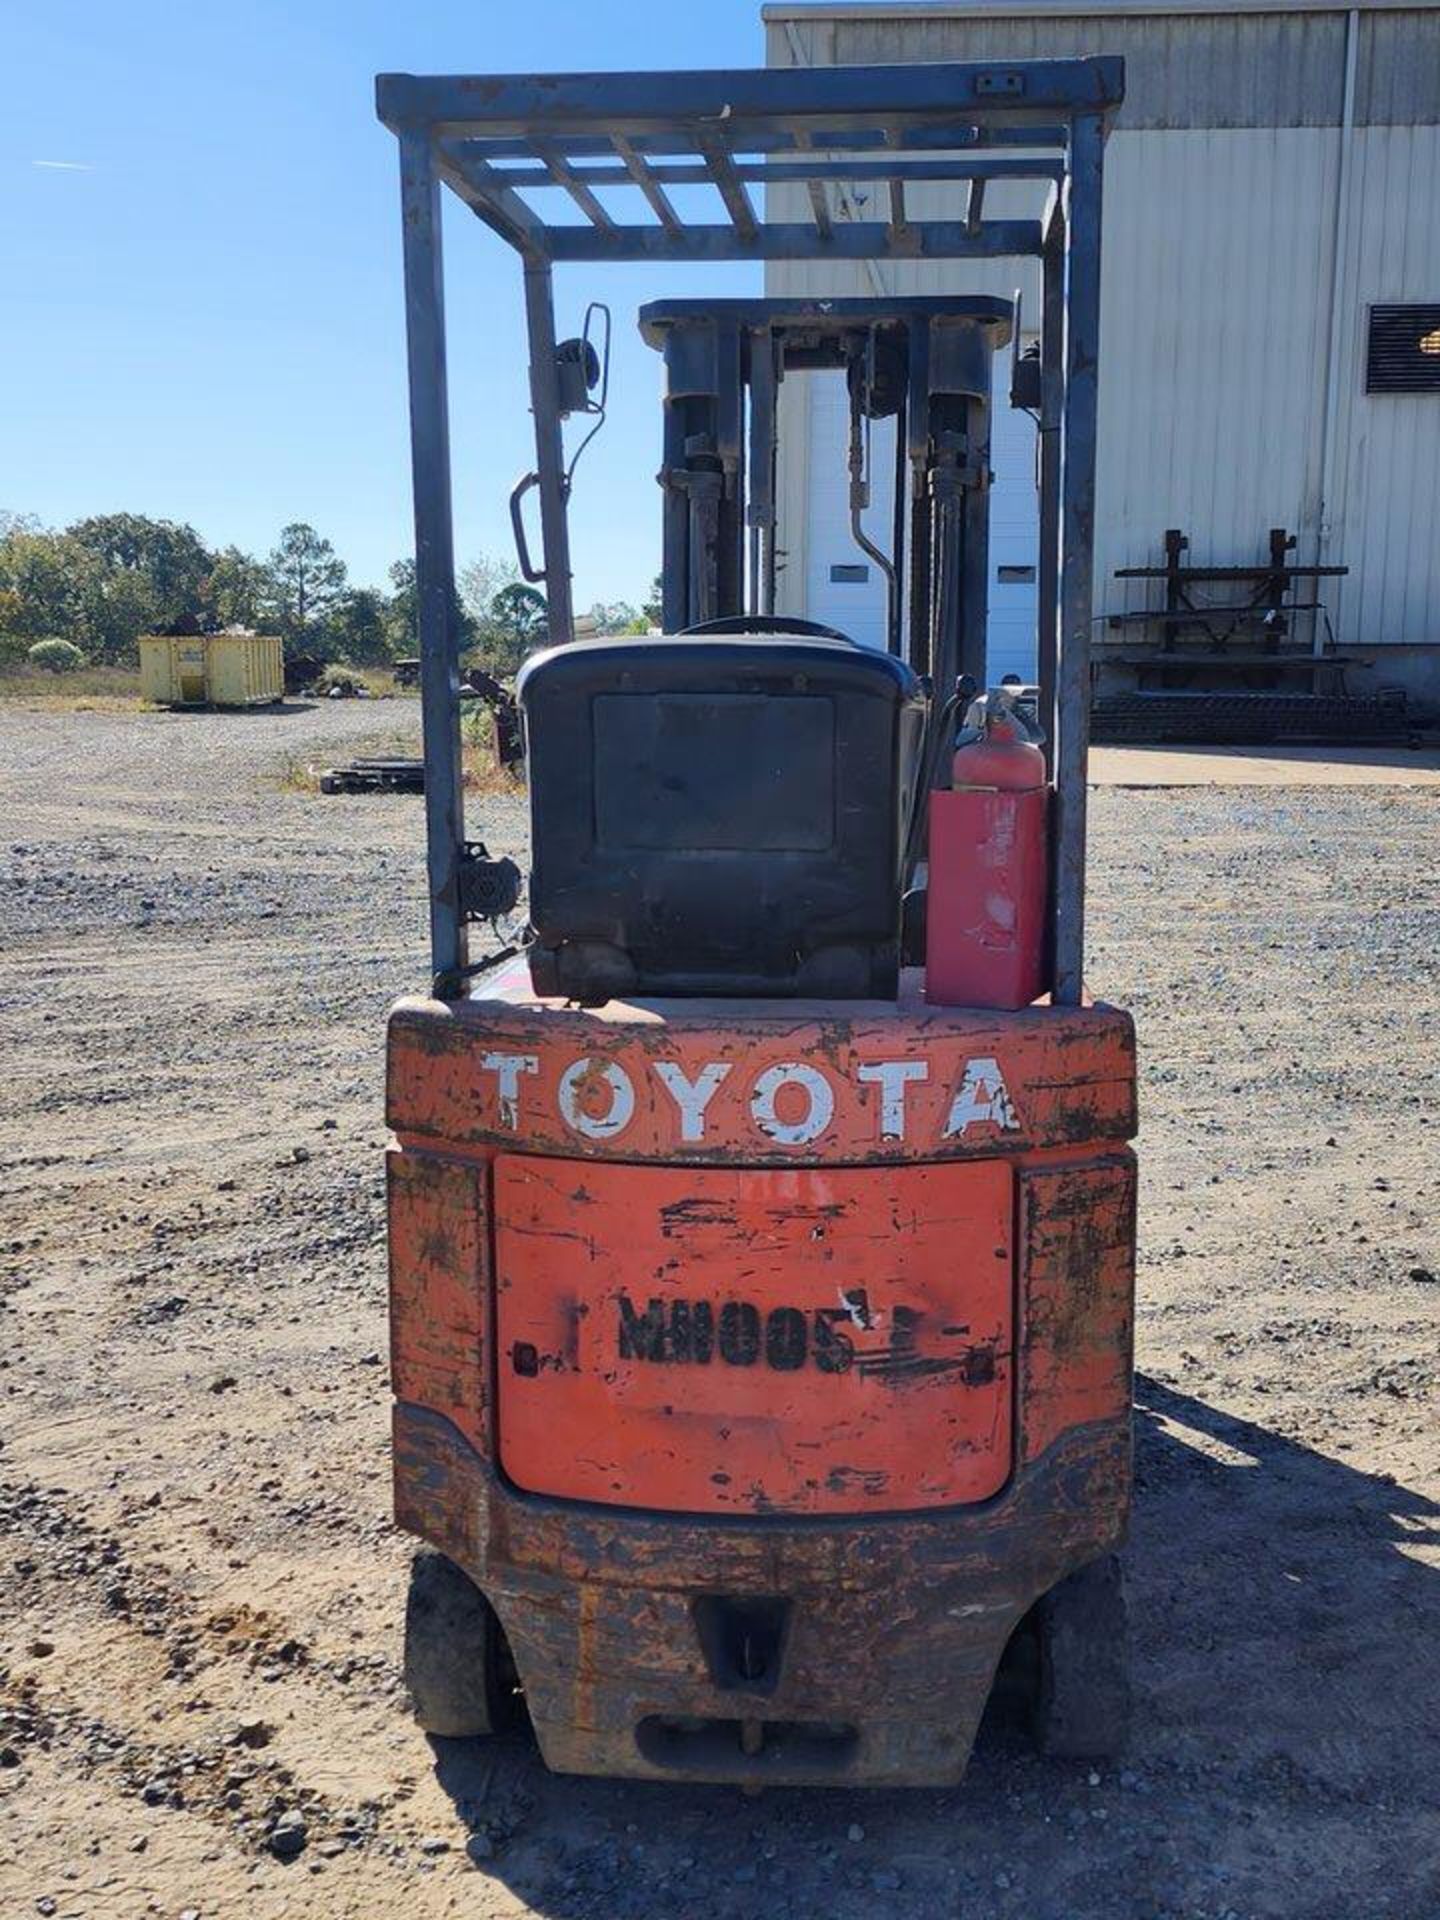 Toyota 30-5FBC15 Ele Forklift 3-Stage Mast; 185" Max Lift ht.; Hrs: 32,982.1; W/ Charger - Image 6 of 17